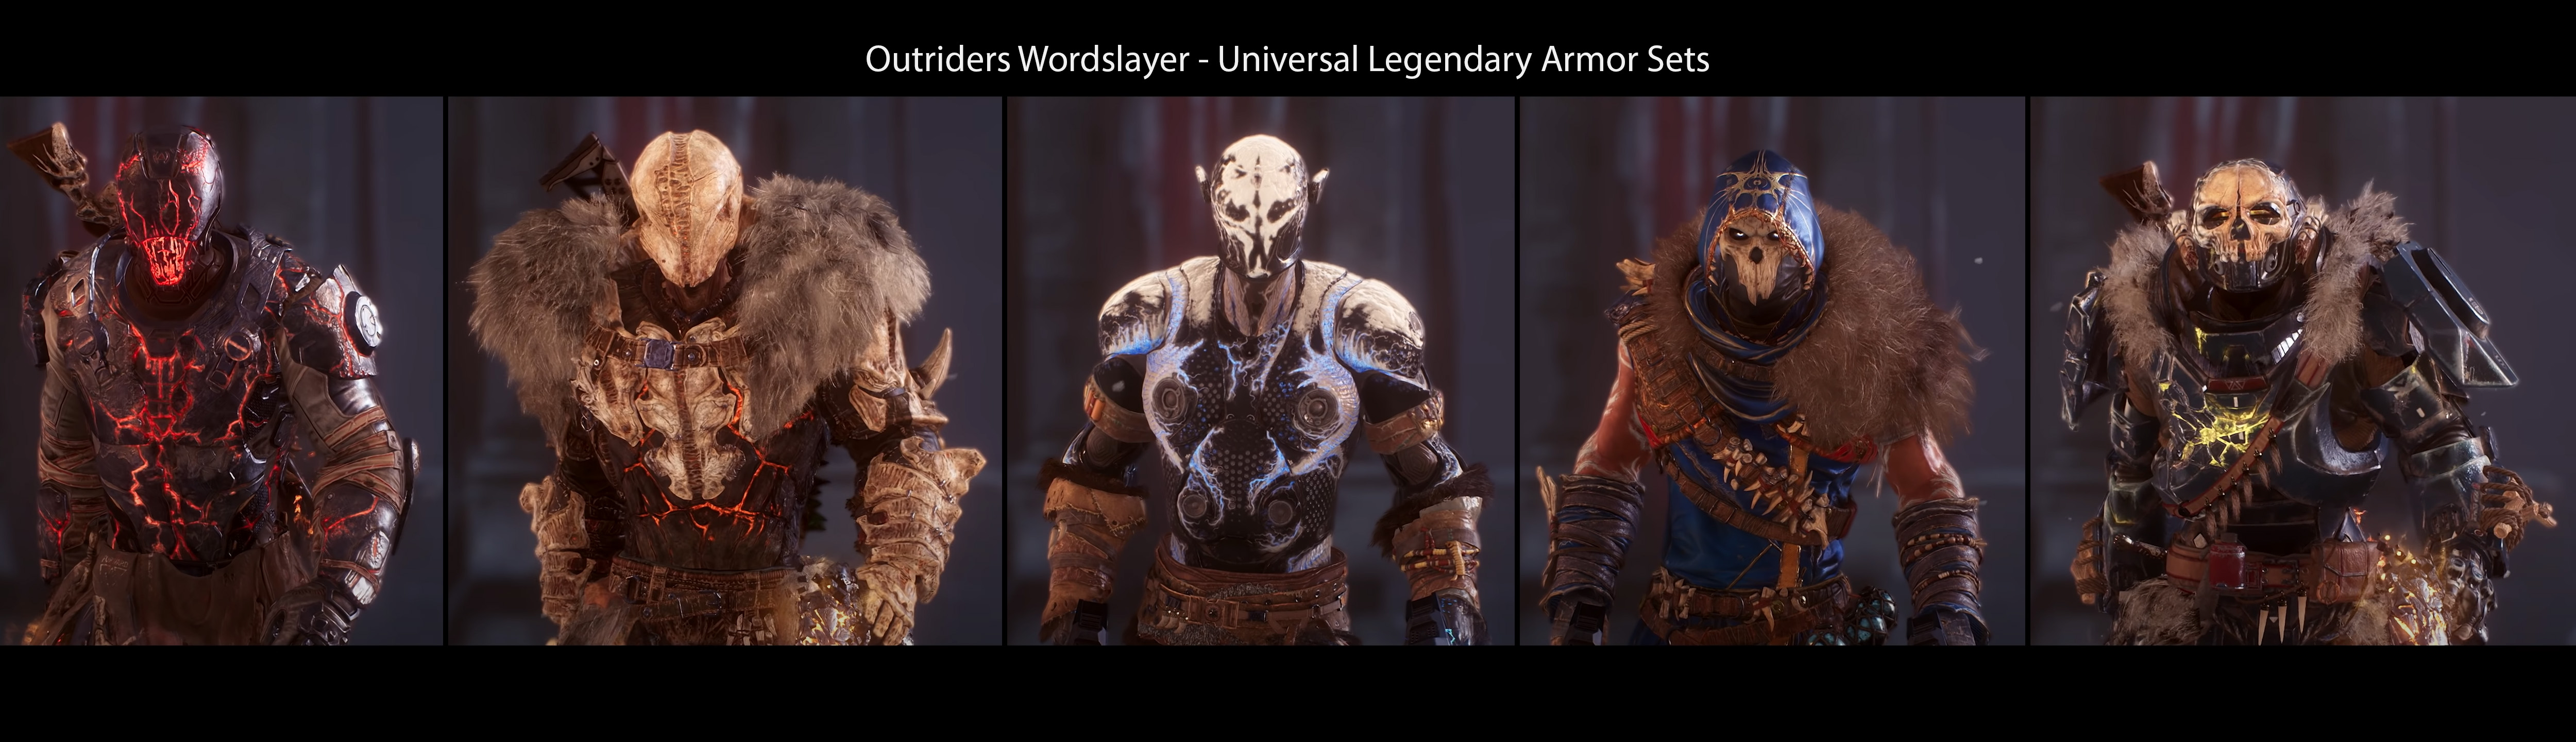 Outriders: Worldslayer's Apocalypse Weapons Explained